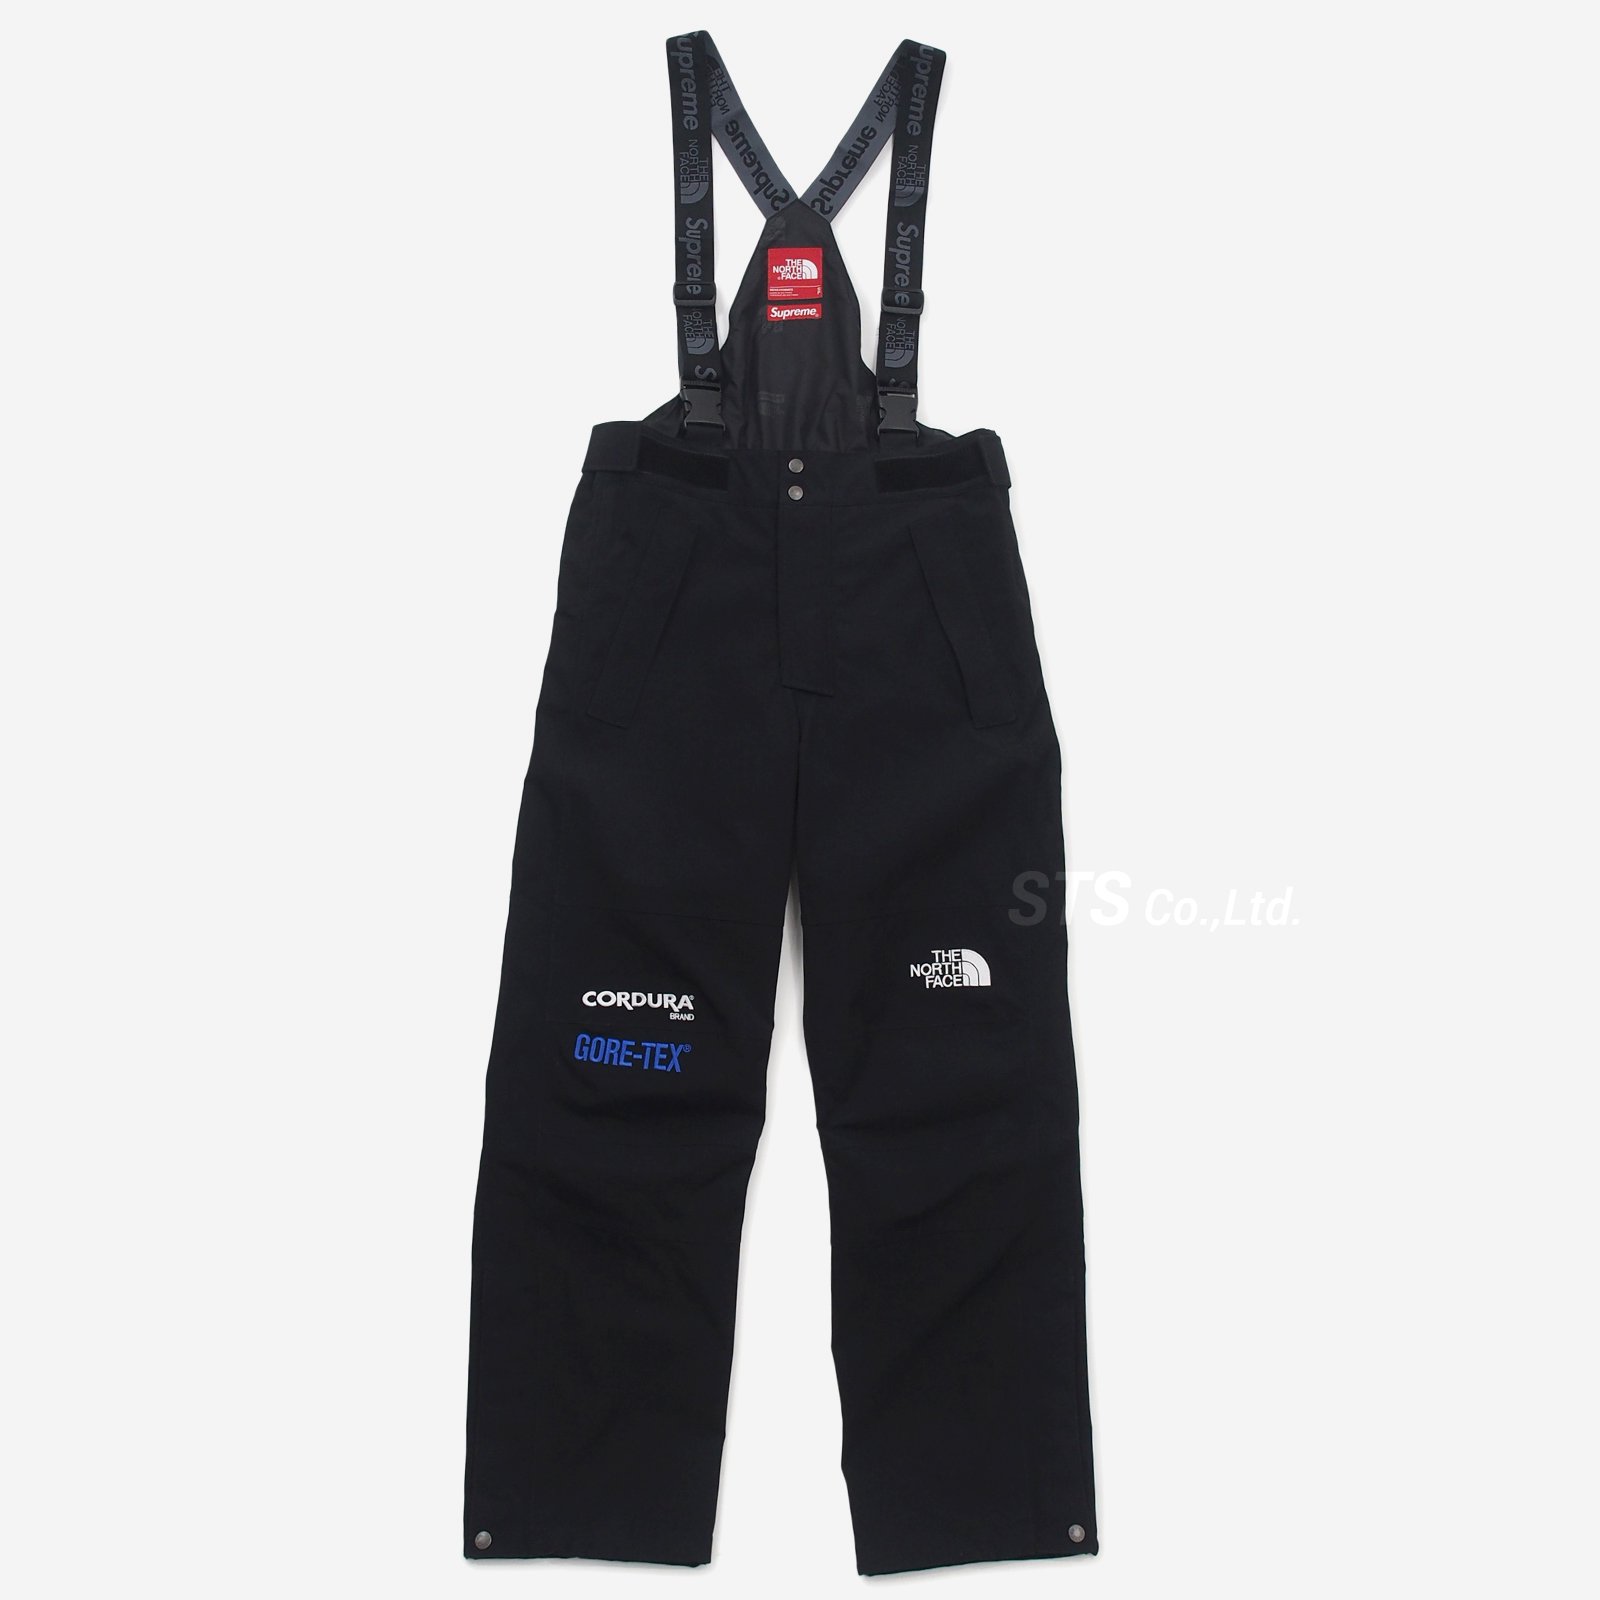 supreme the north face expedition pant Sウエスト約８６１０４cm